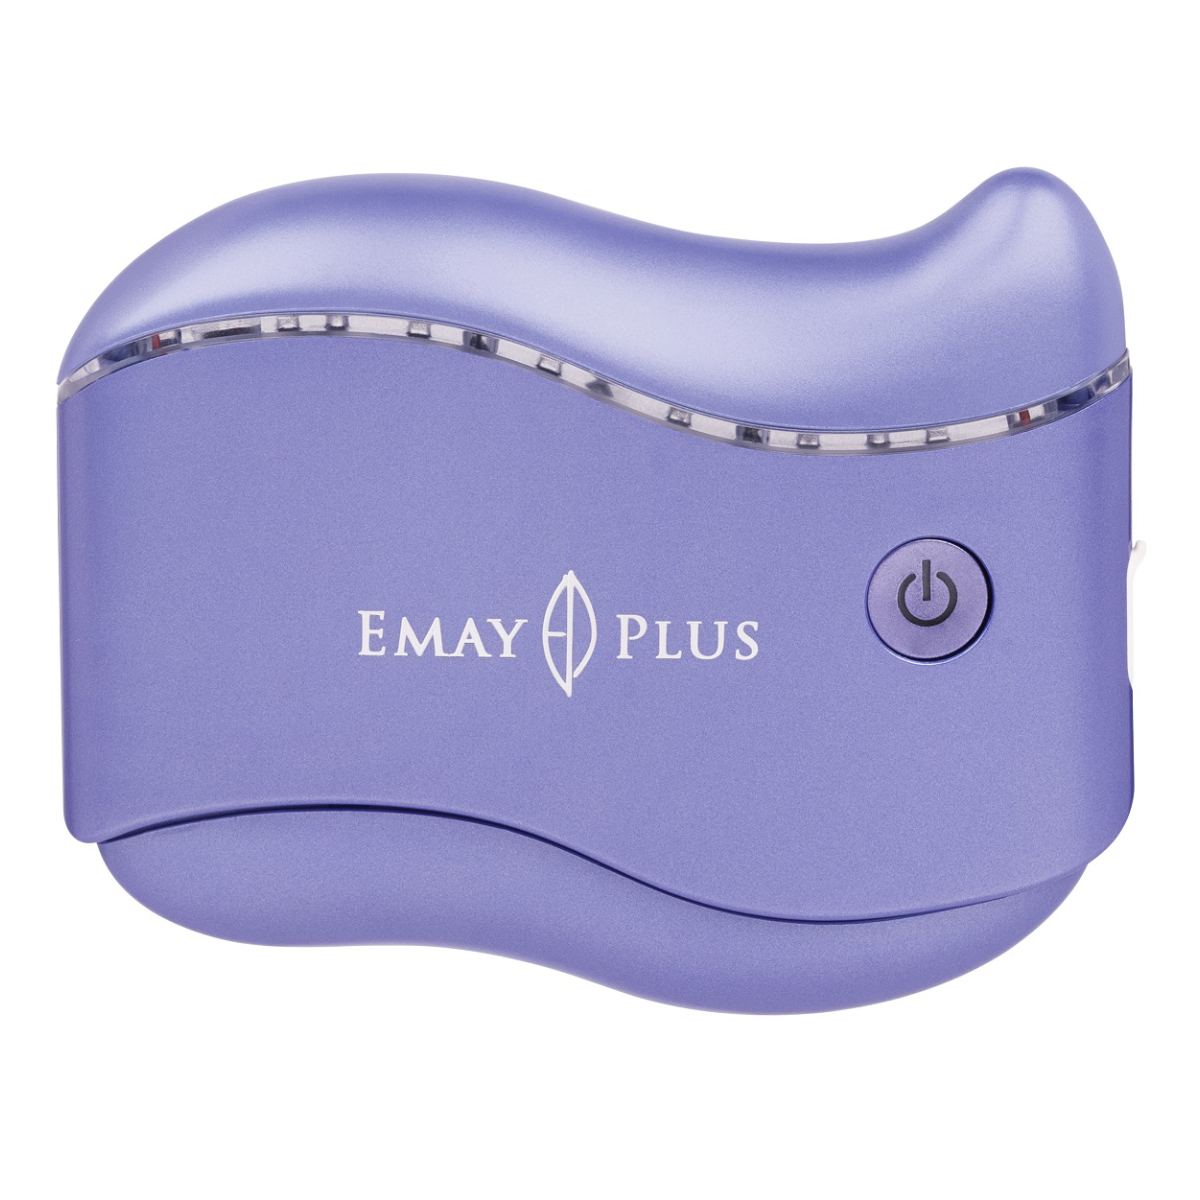 Emay Plus Dual Lifting Face Slimmer, , large image number 1